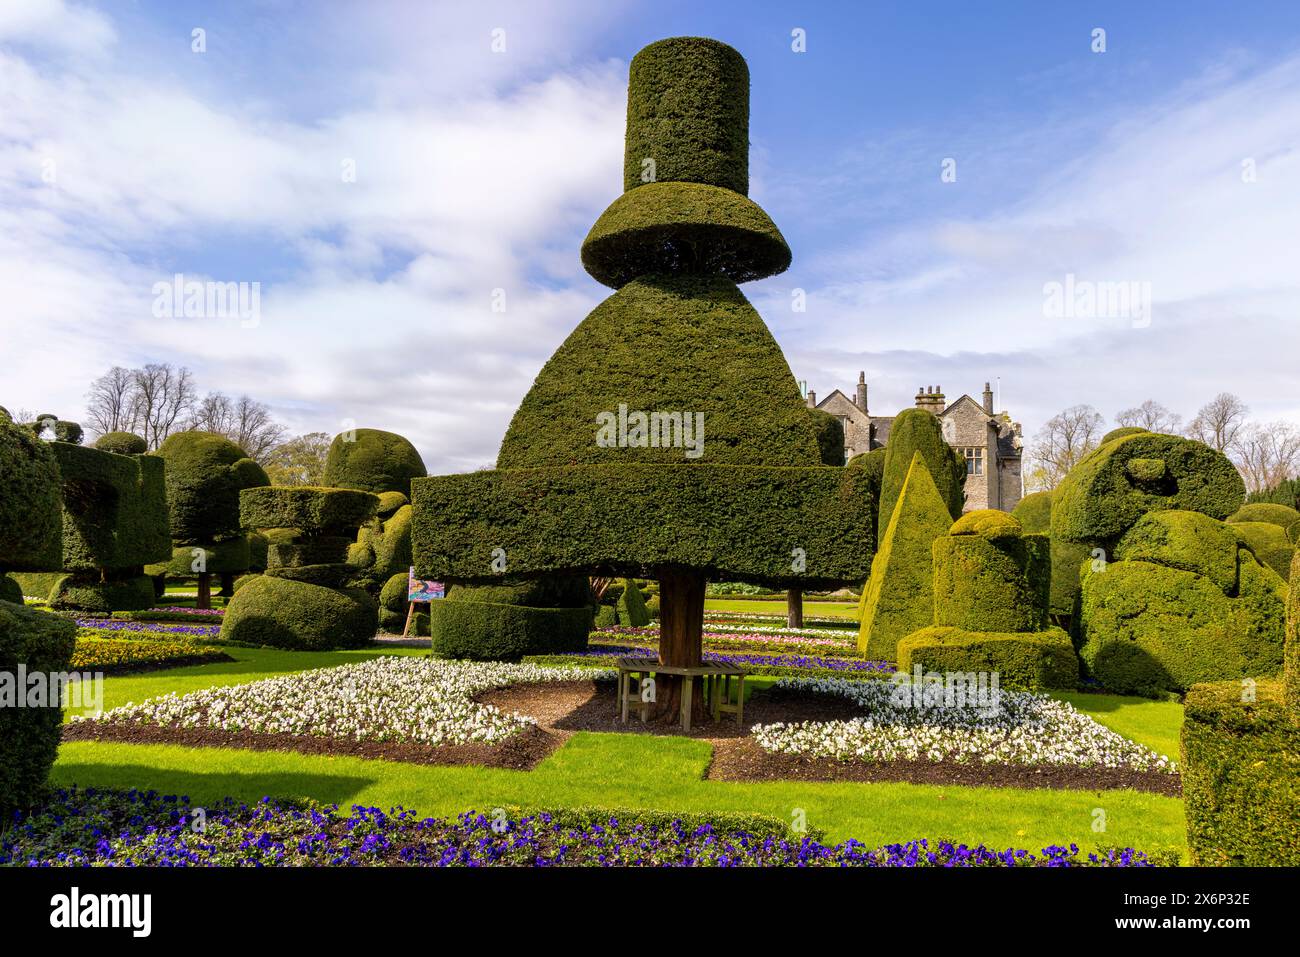 Stunning topiary in a variety of geometrical shapes in the gardens of Levens Hall, Kendal, Lake District, Cumbria, England, Great Britain. Stock Photo